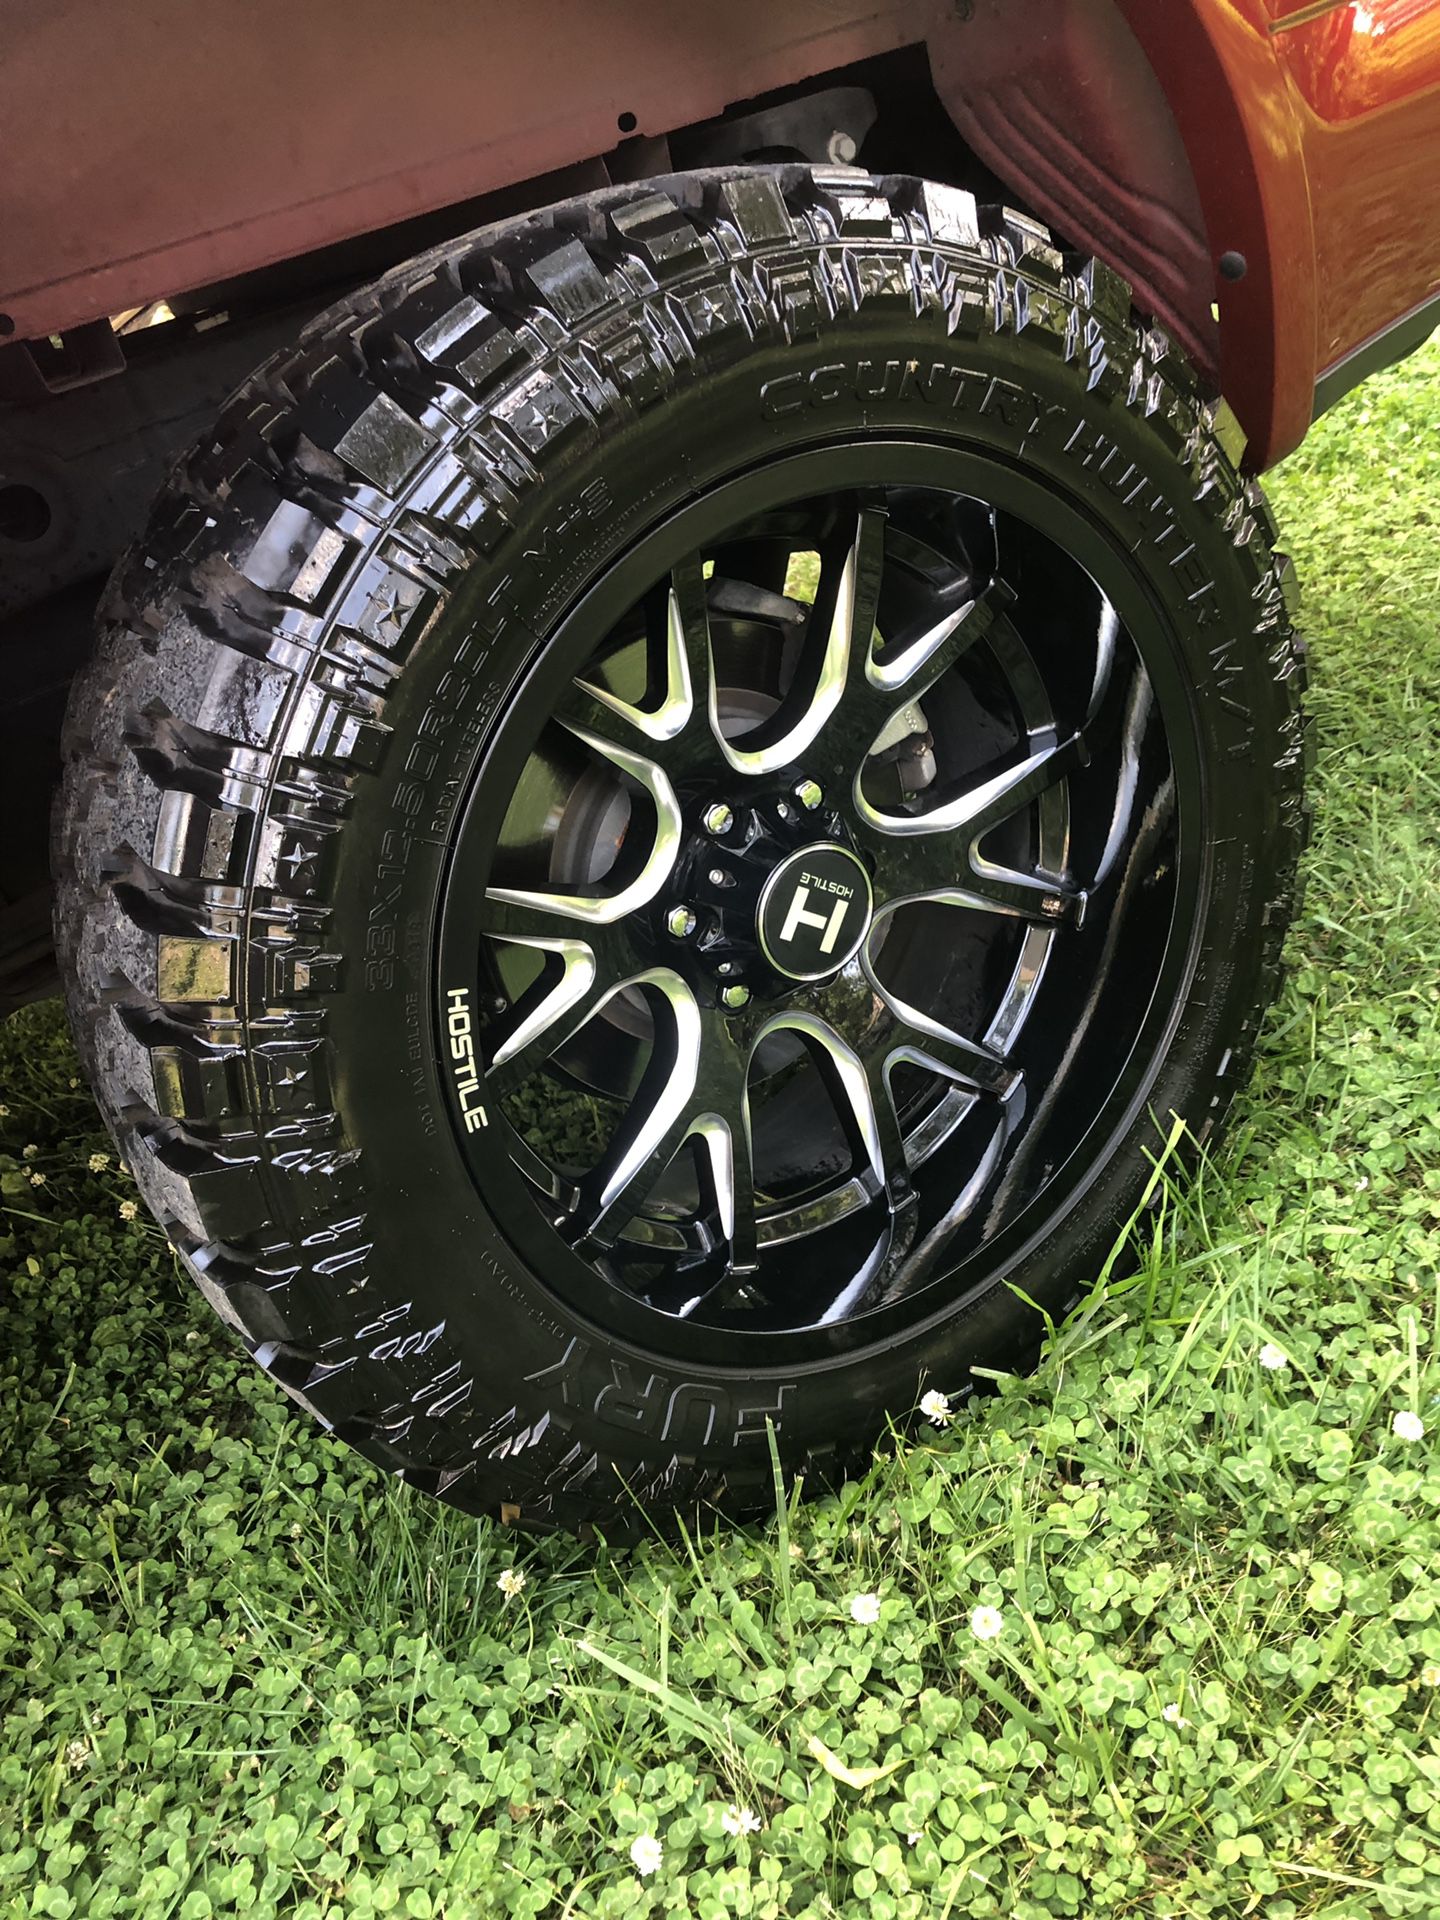 Off-road tire and wheel 6lugs. Tire brand- fury mud. Rims- hostel black and chrome